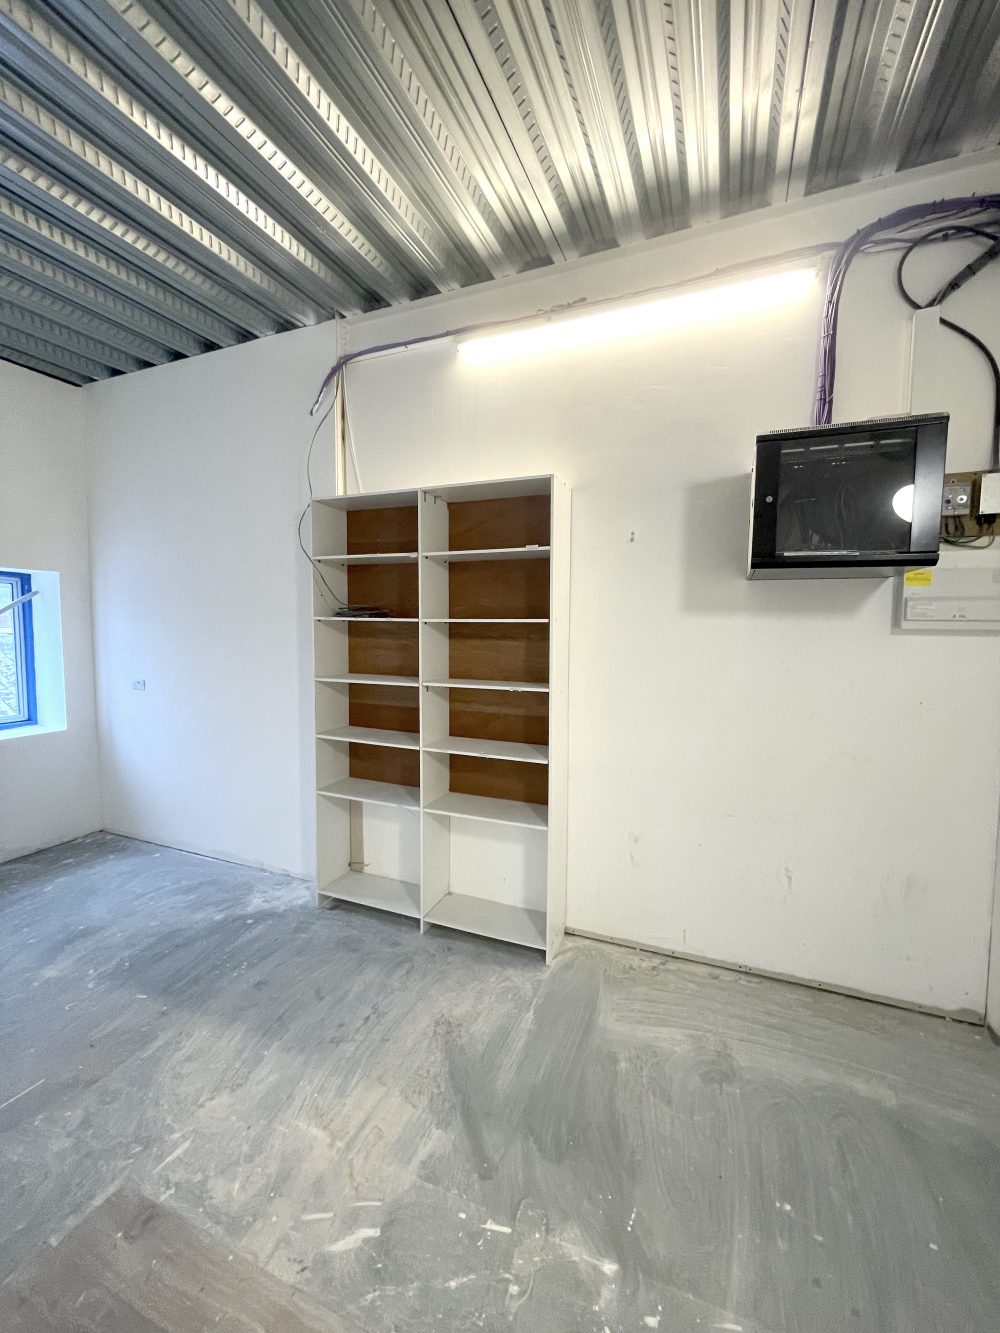 First floor office space : light idustrial creative artist studio to rent in E18 S South Woodford Pic 9